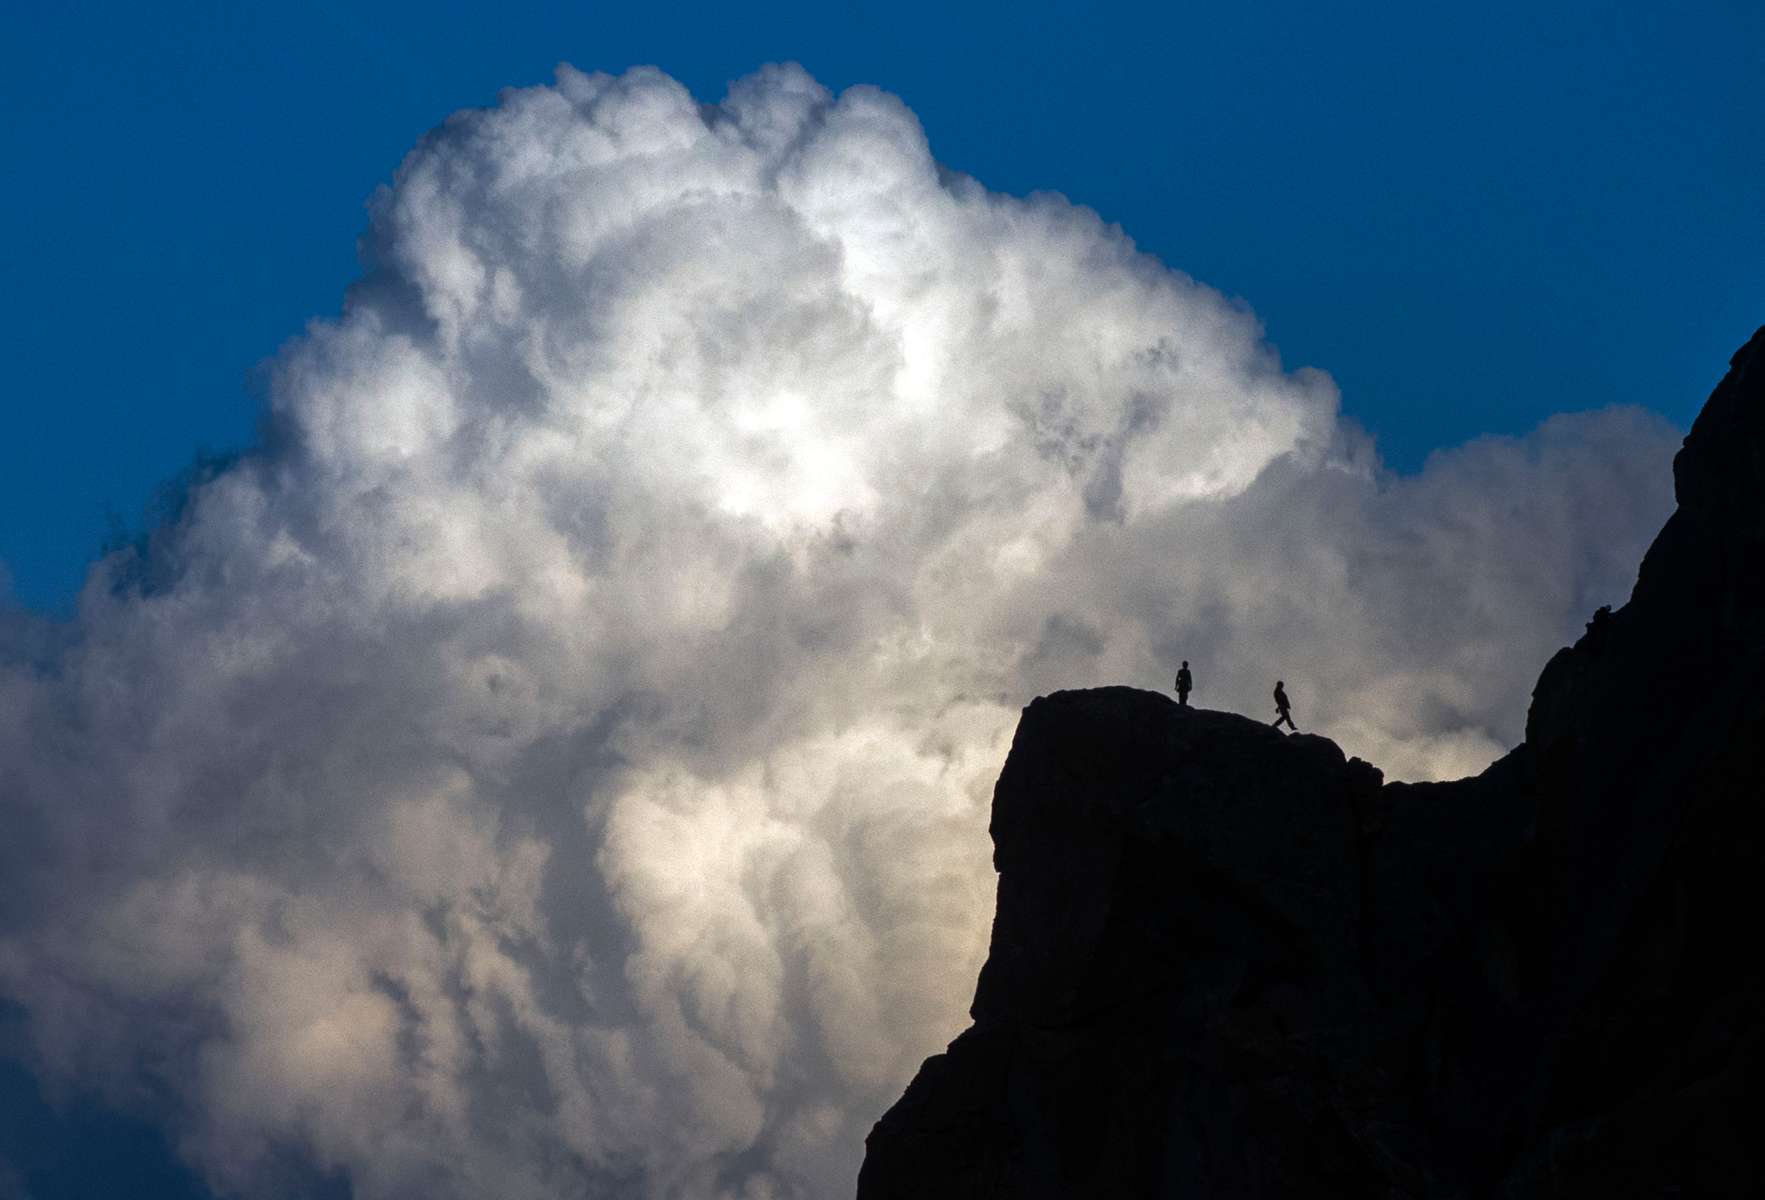 Climbers reach the top of a climbing pitch at Smith Rock State Park as clouds build in Terrebonne on Sunday, October 18, 2015. Smith Rock attracts thousands of visitors each year who climb its vertical walls and spires and enjoy hiking along the Crooked River. (Andy Nelson/The Register-Guard)